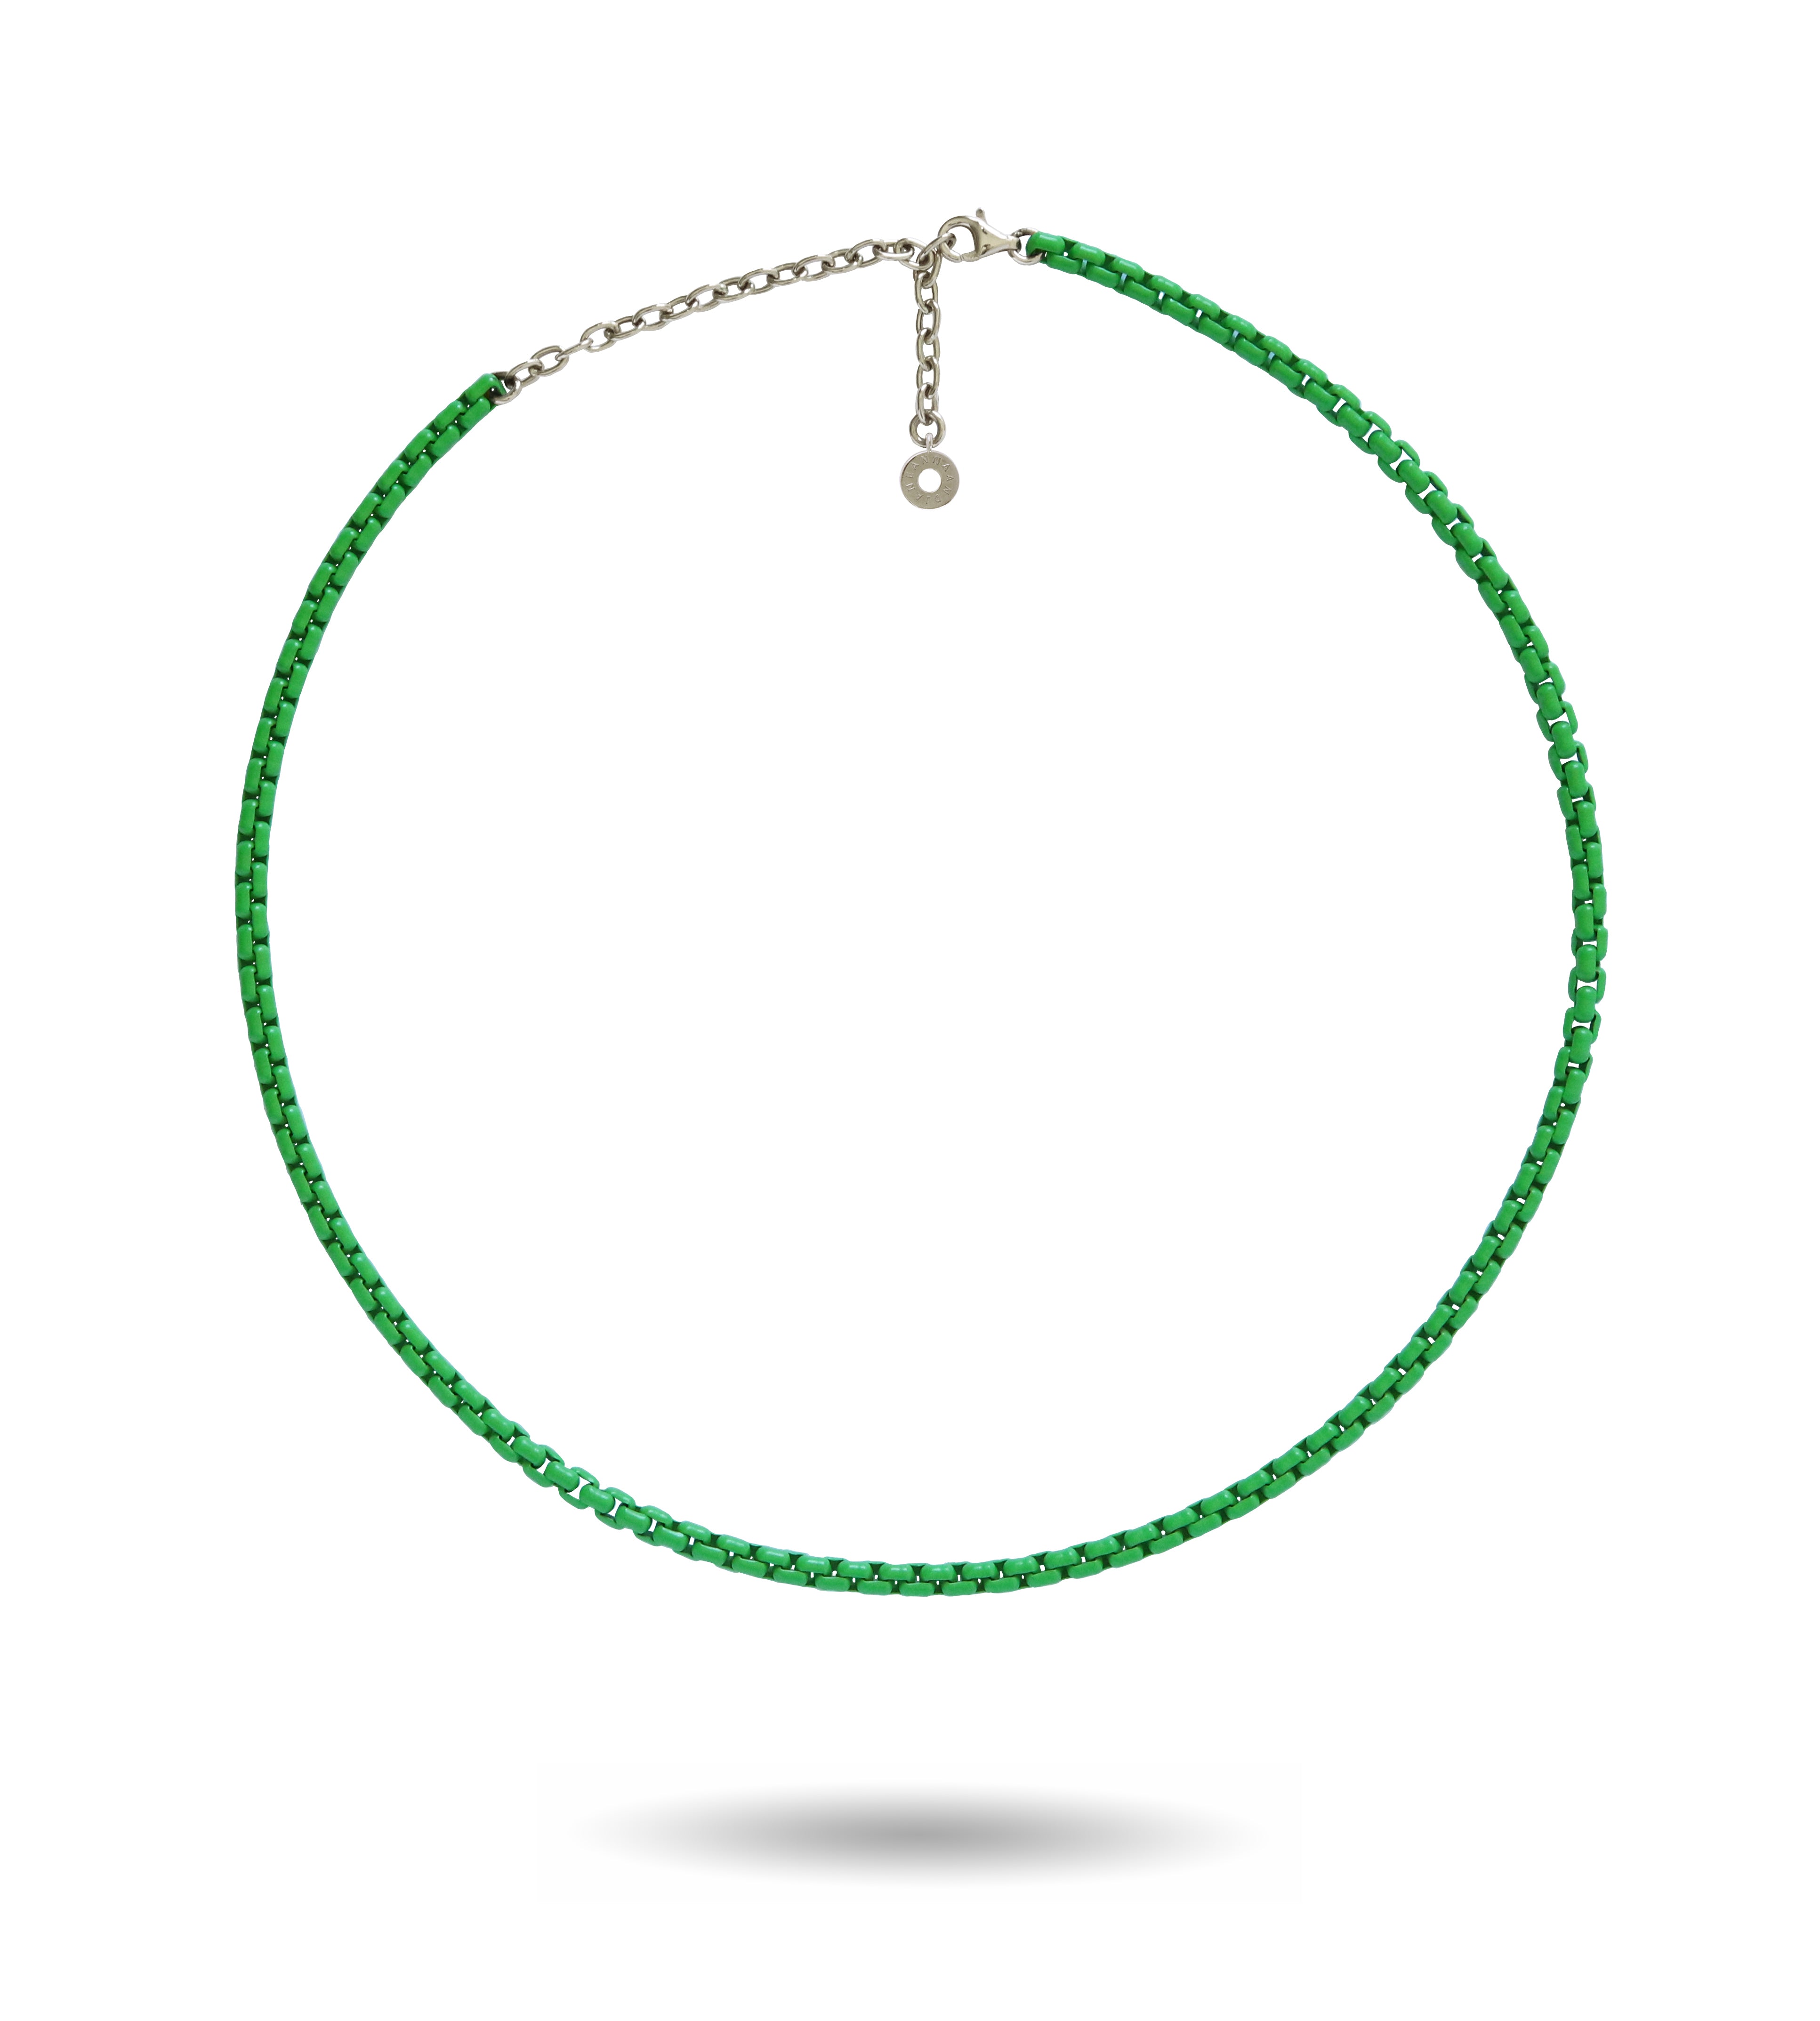 Green Pea Enamelled Chain Necklace with 18K Gold Accessories (Medium)